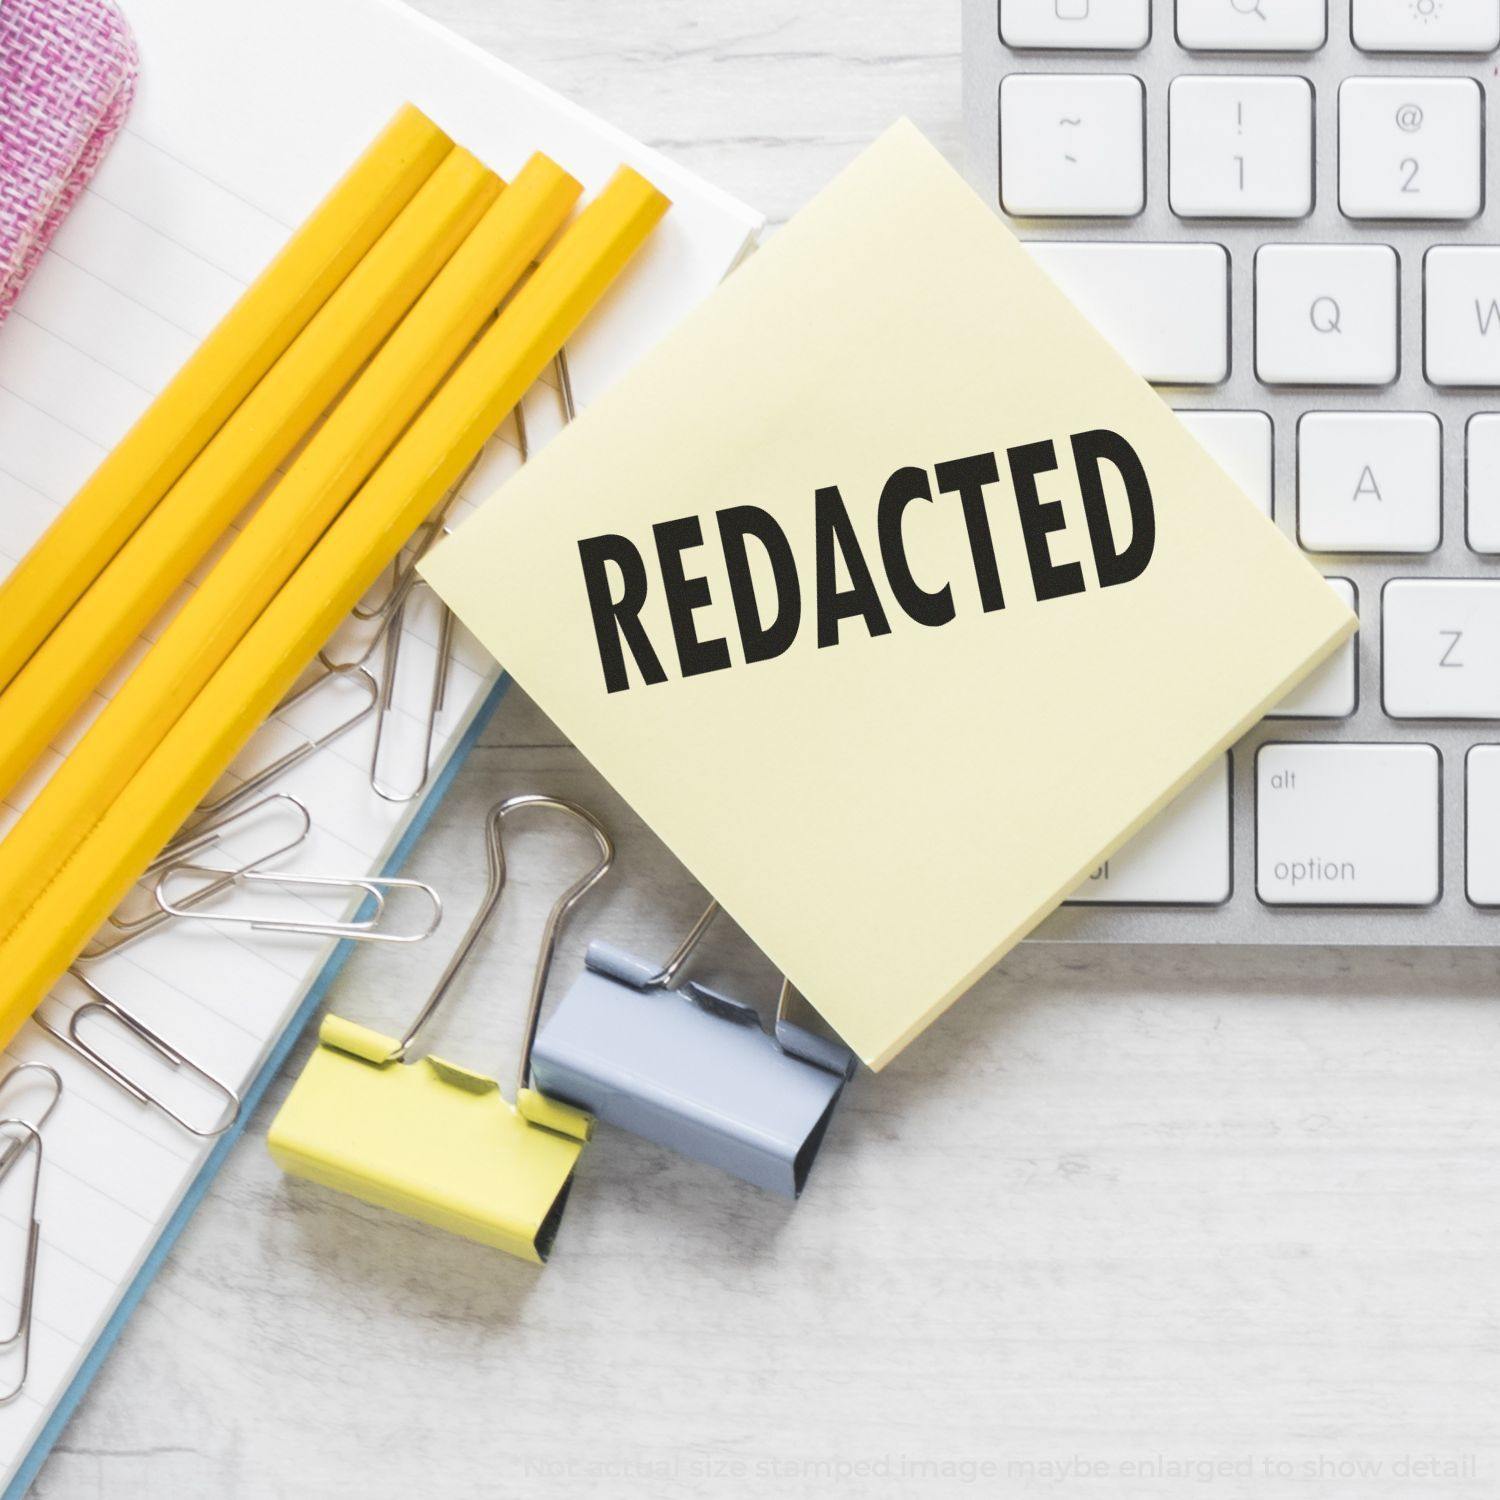 A stock office rubber stamp with a stamped image showing how the text "REDACTED" in a large font is displayed after stamping.